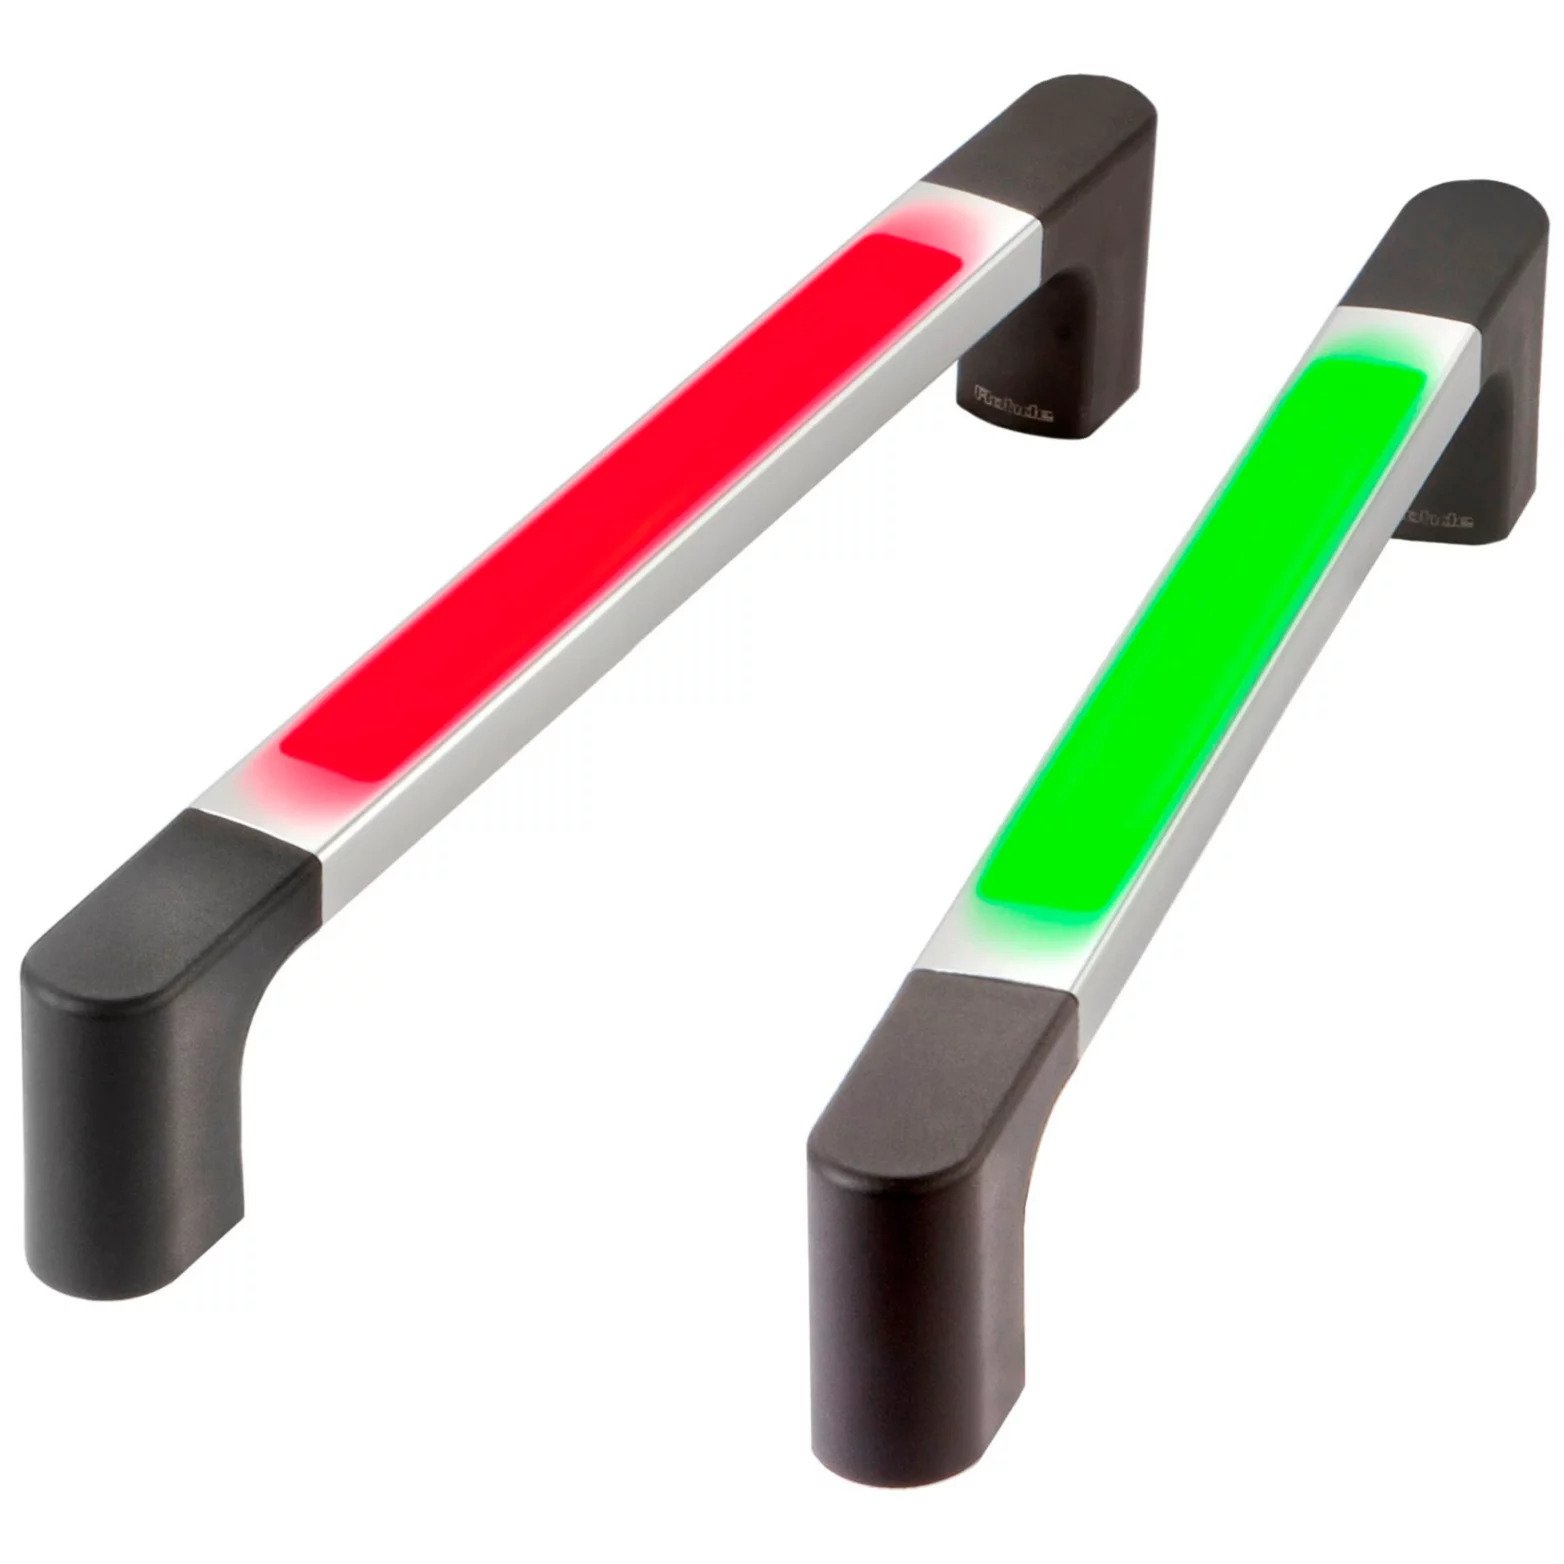 Handles with a tricolor illuminated handle strip.